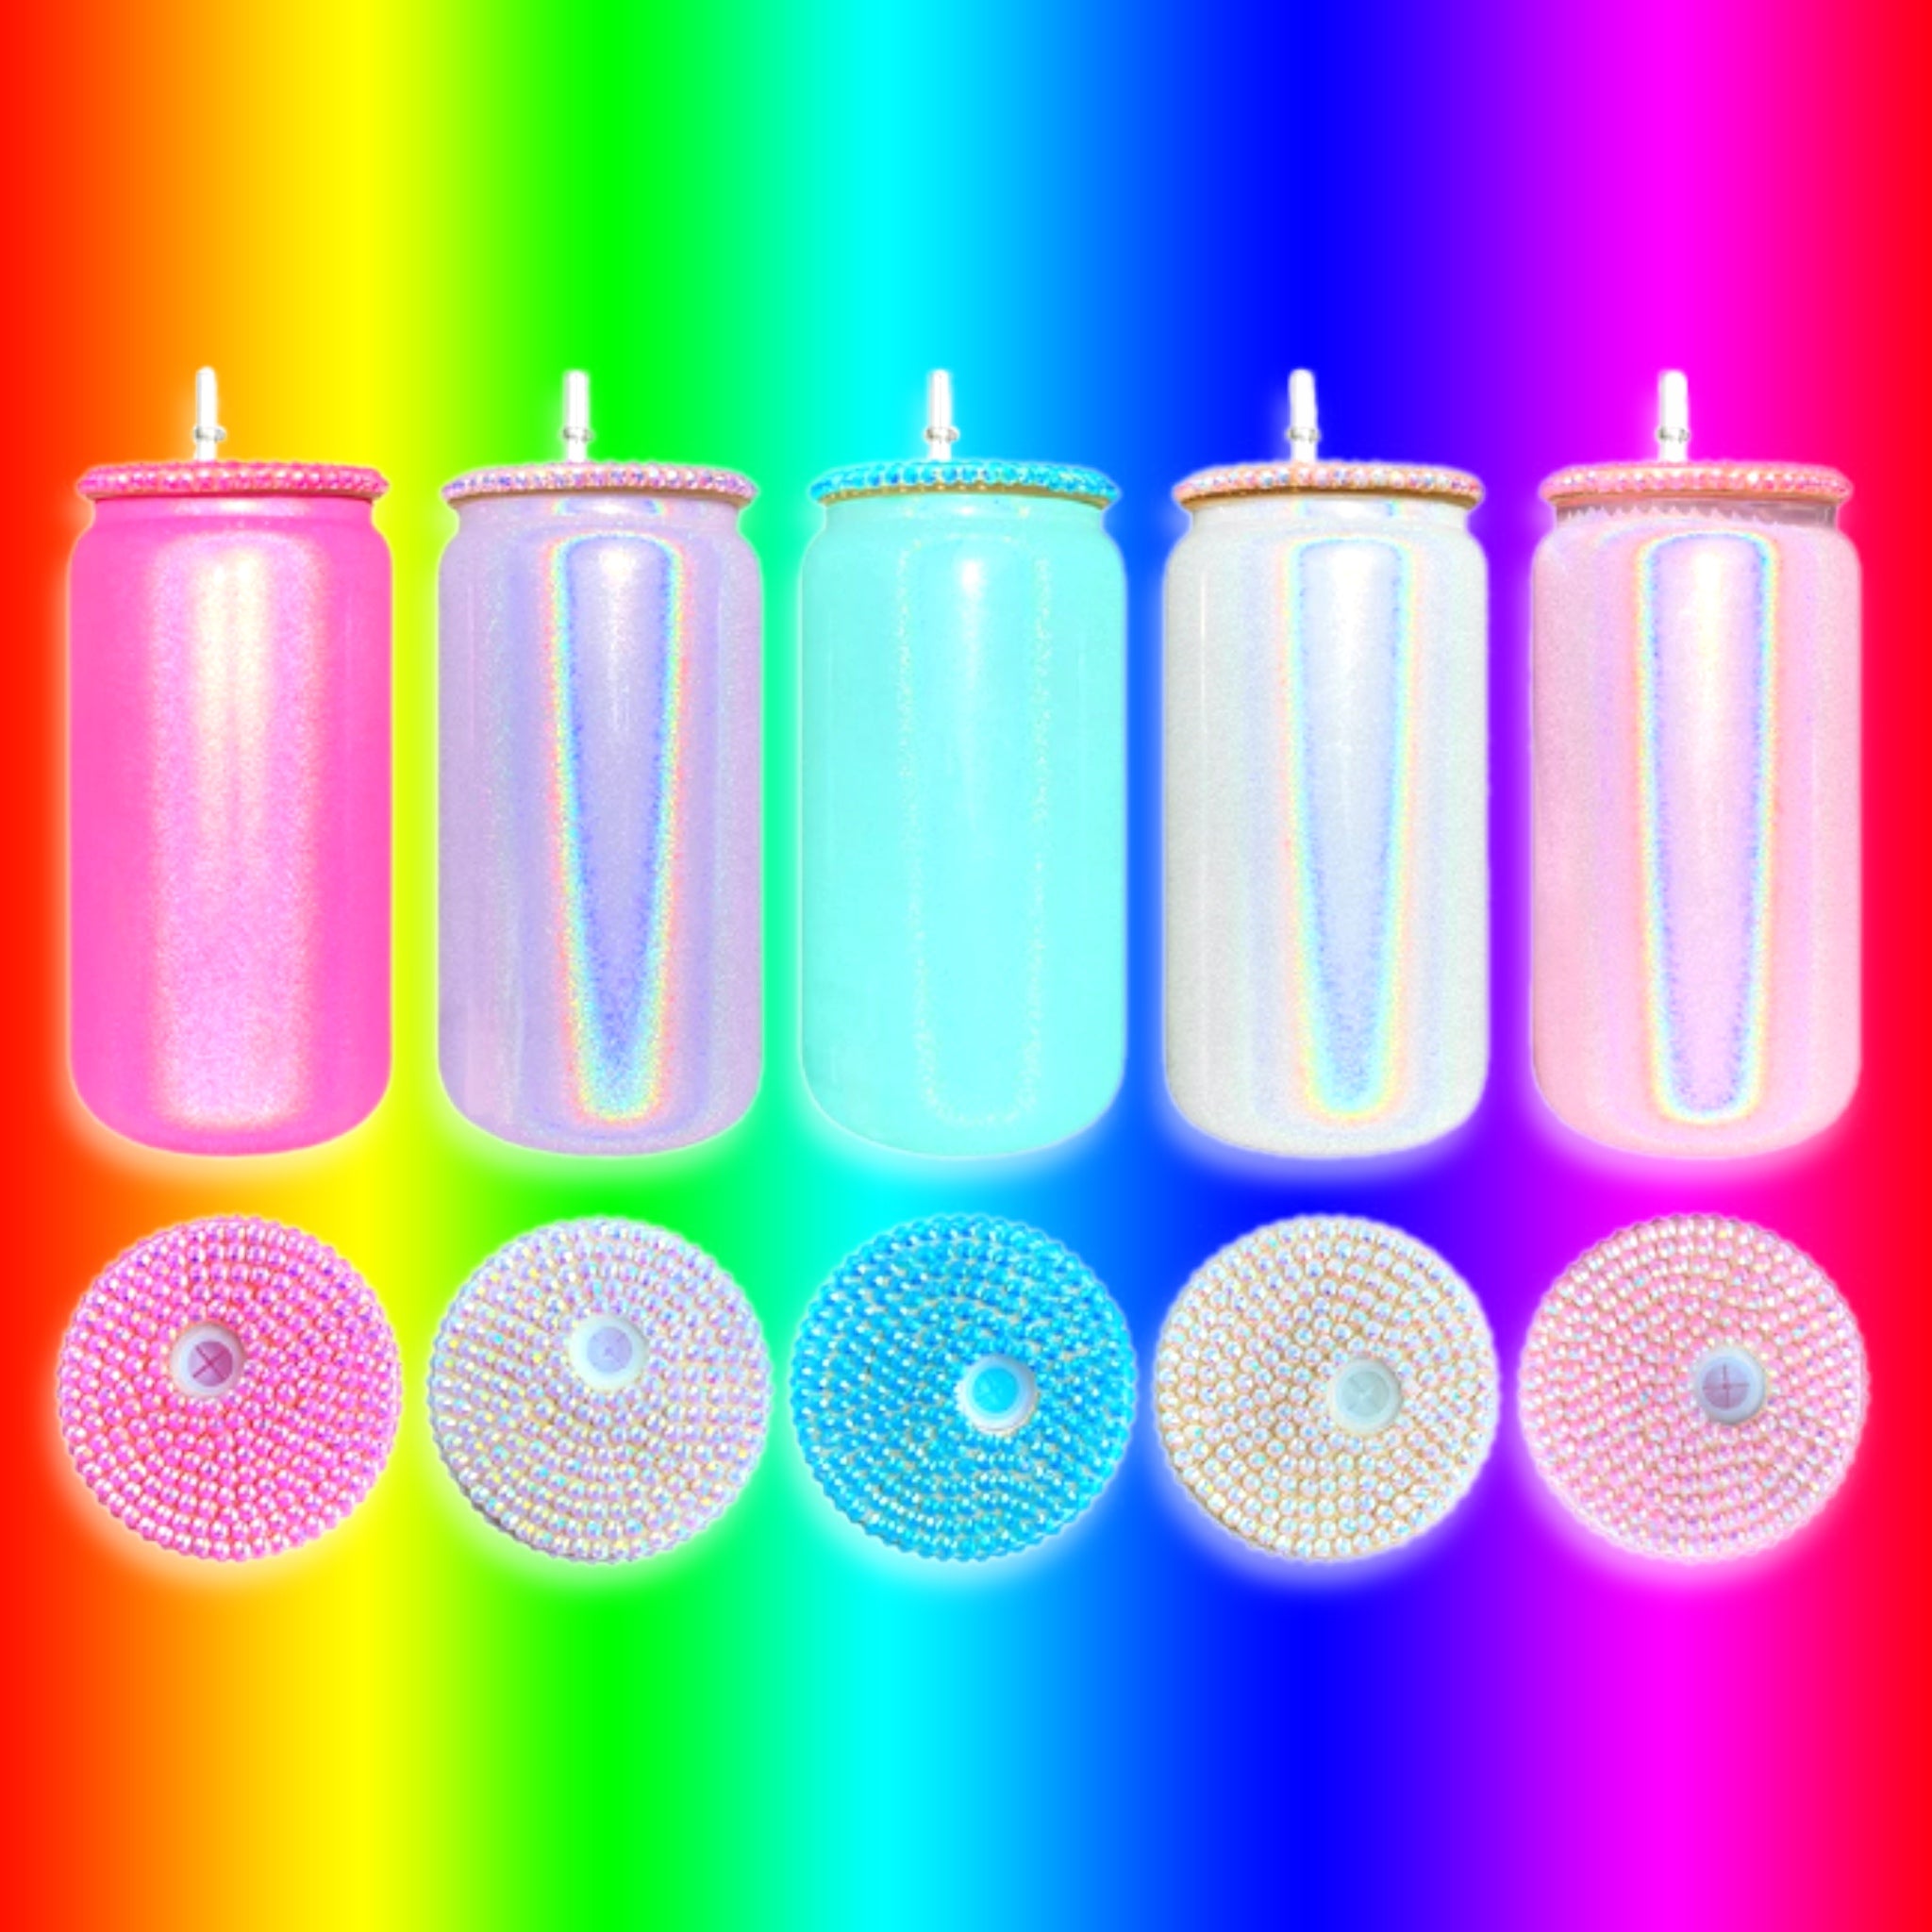 16oz Sublimation Blank Glow in Dark Iridescent Glitter Glass Jar Cans Tumblers (Includes Bamboo Lid Straw), Green